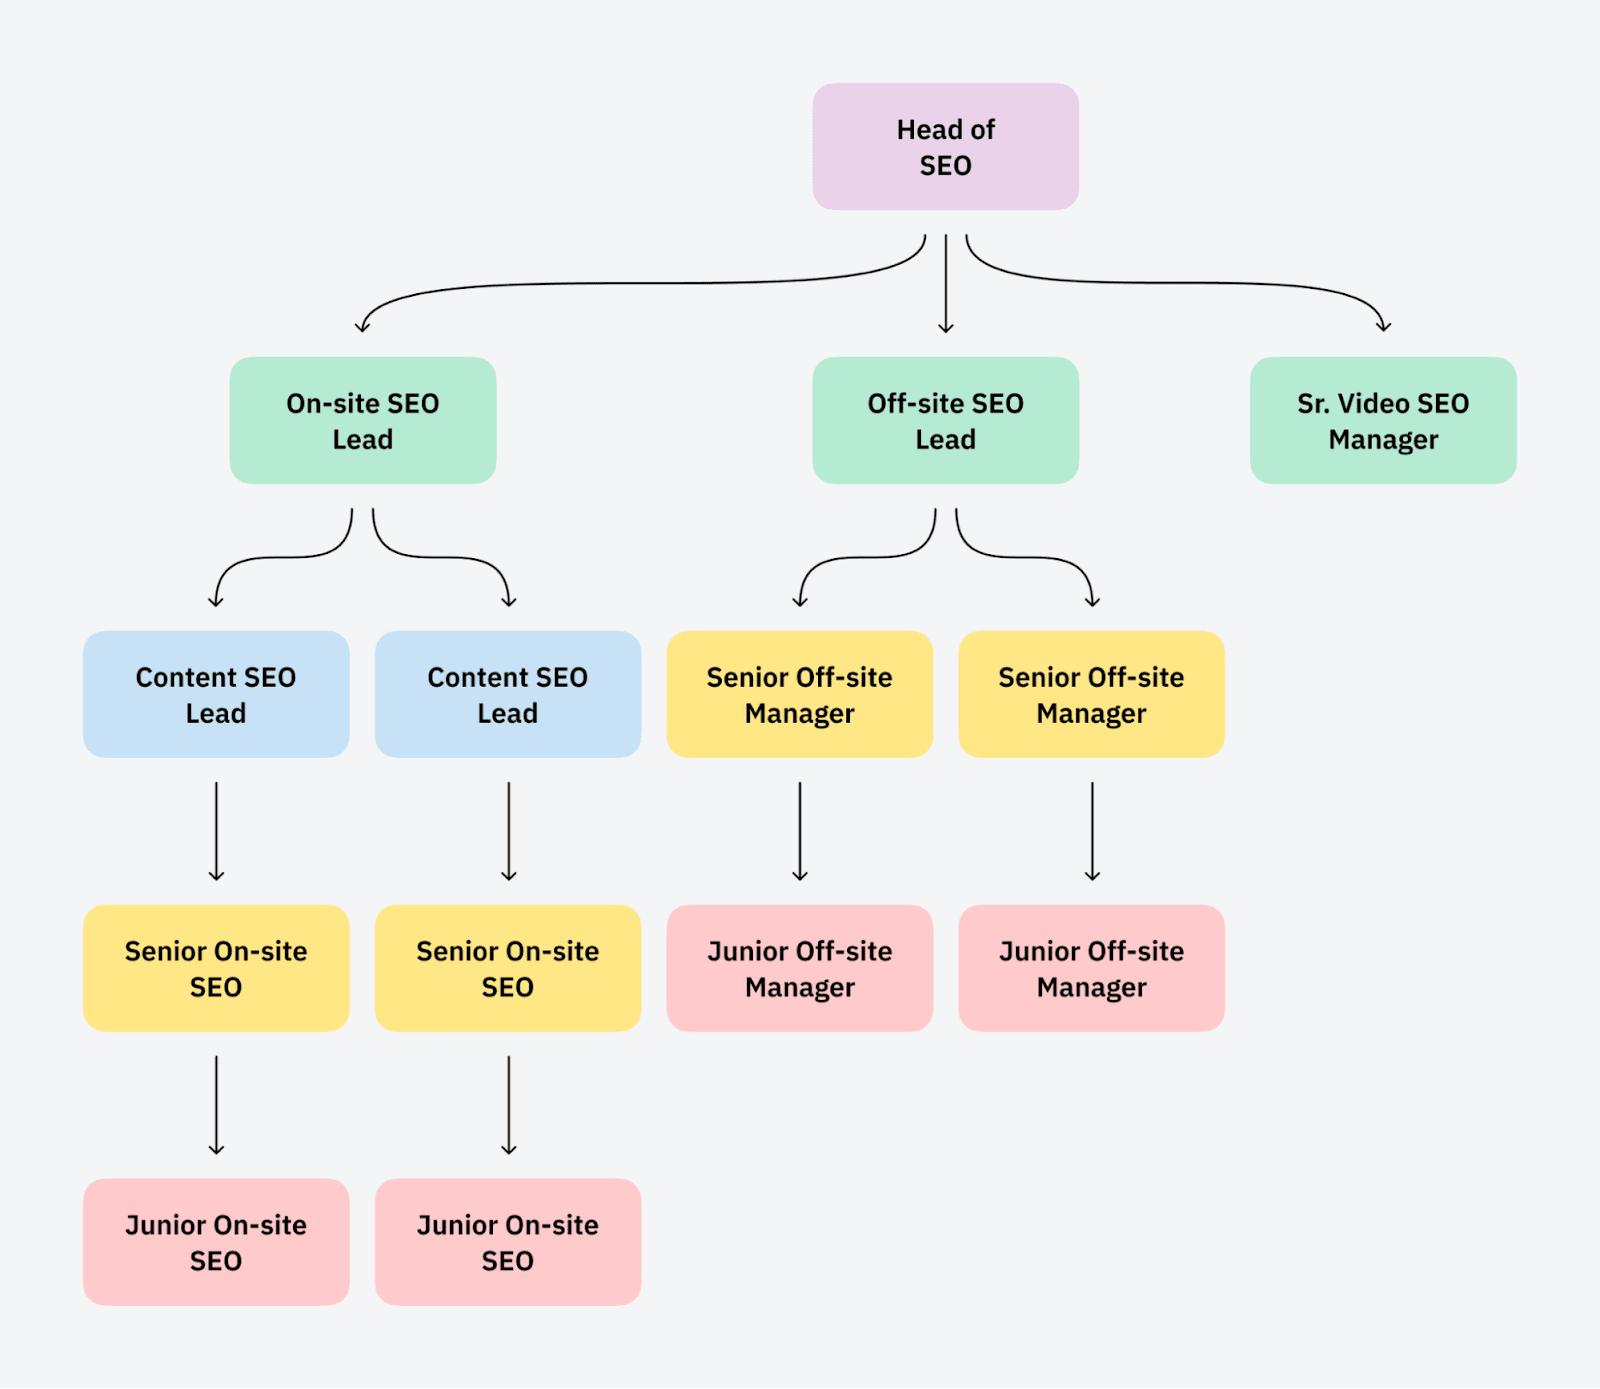 Nord VPN large in-house SEO team structure example
